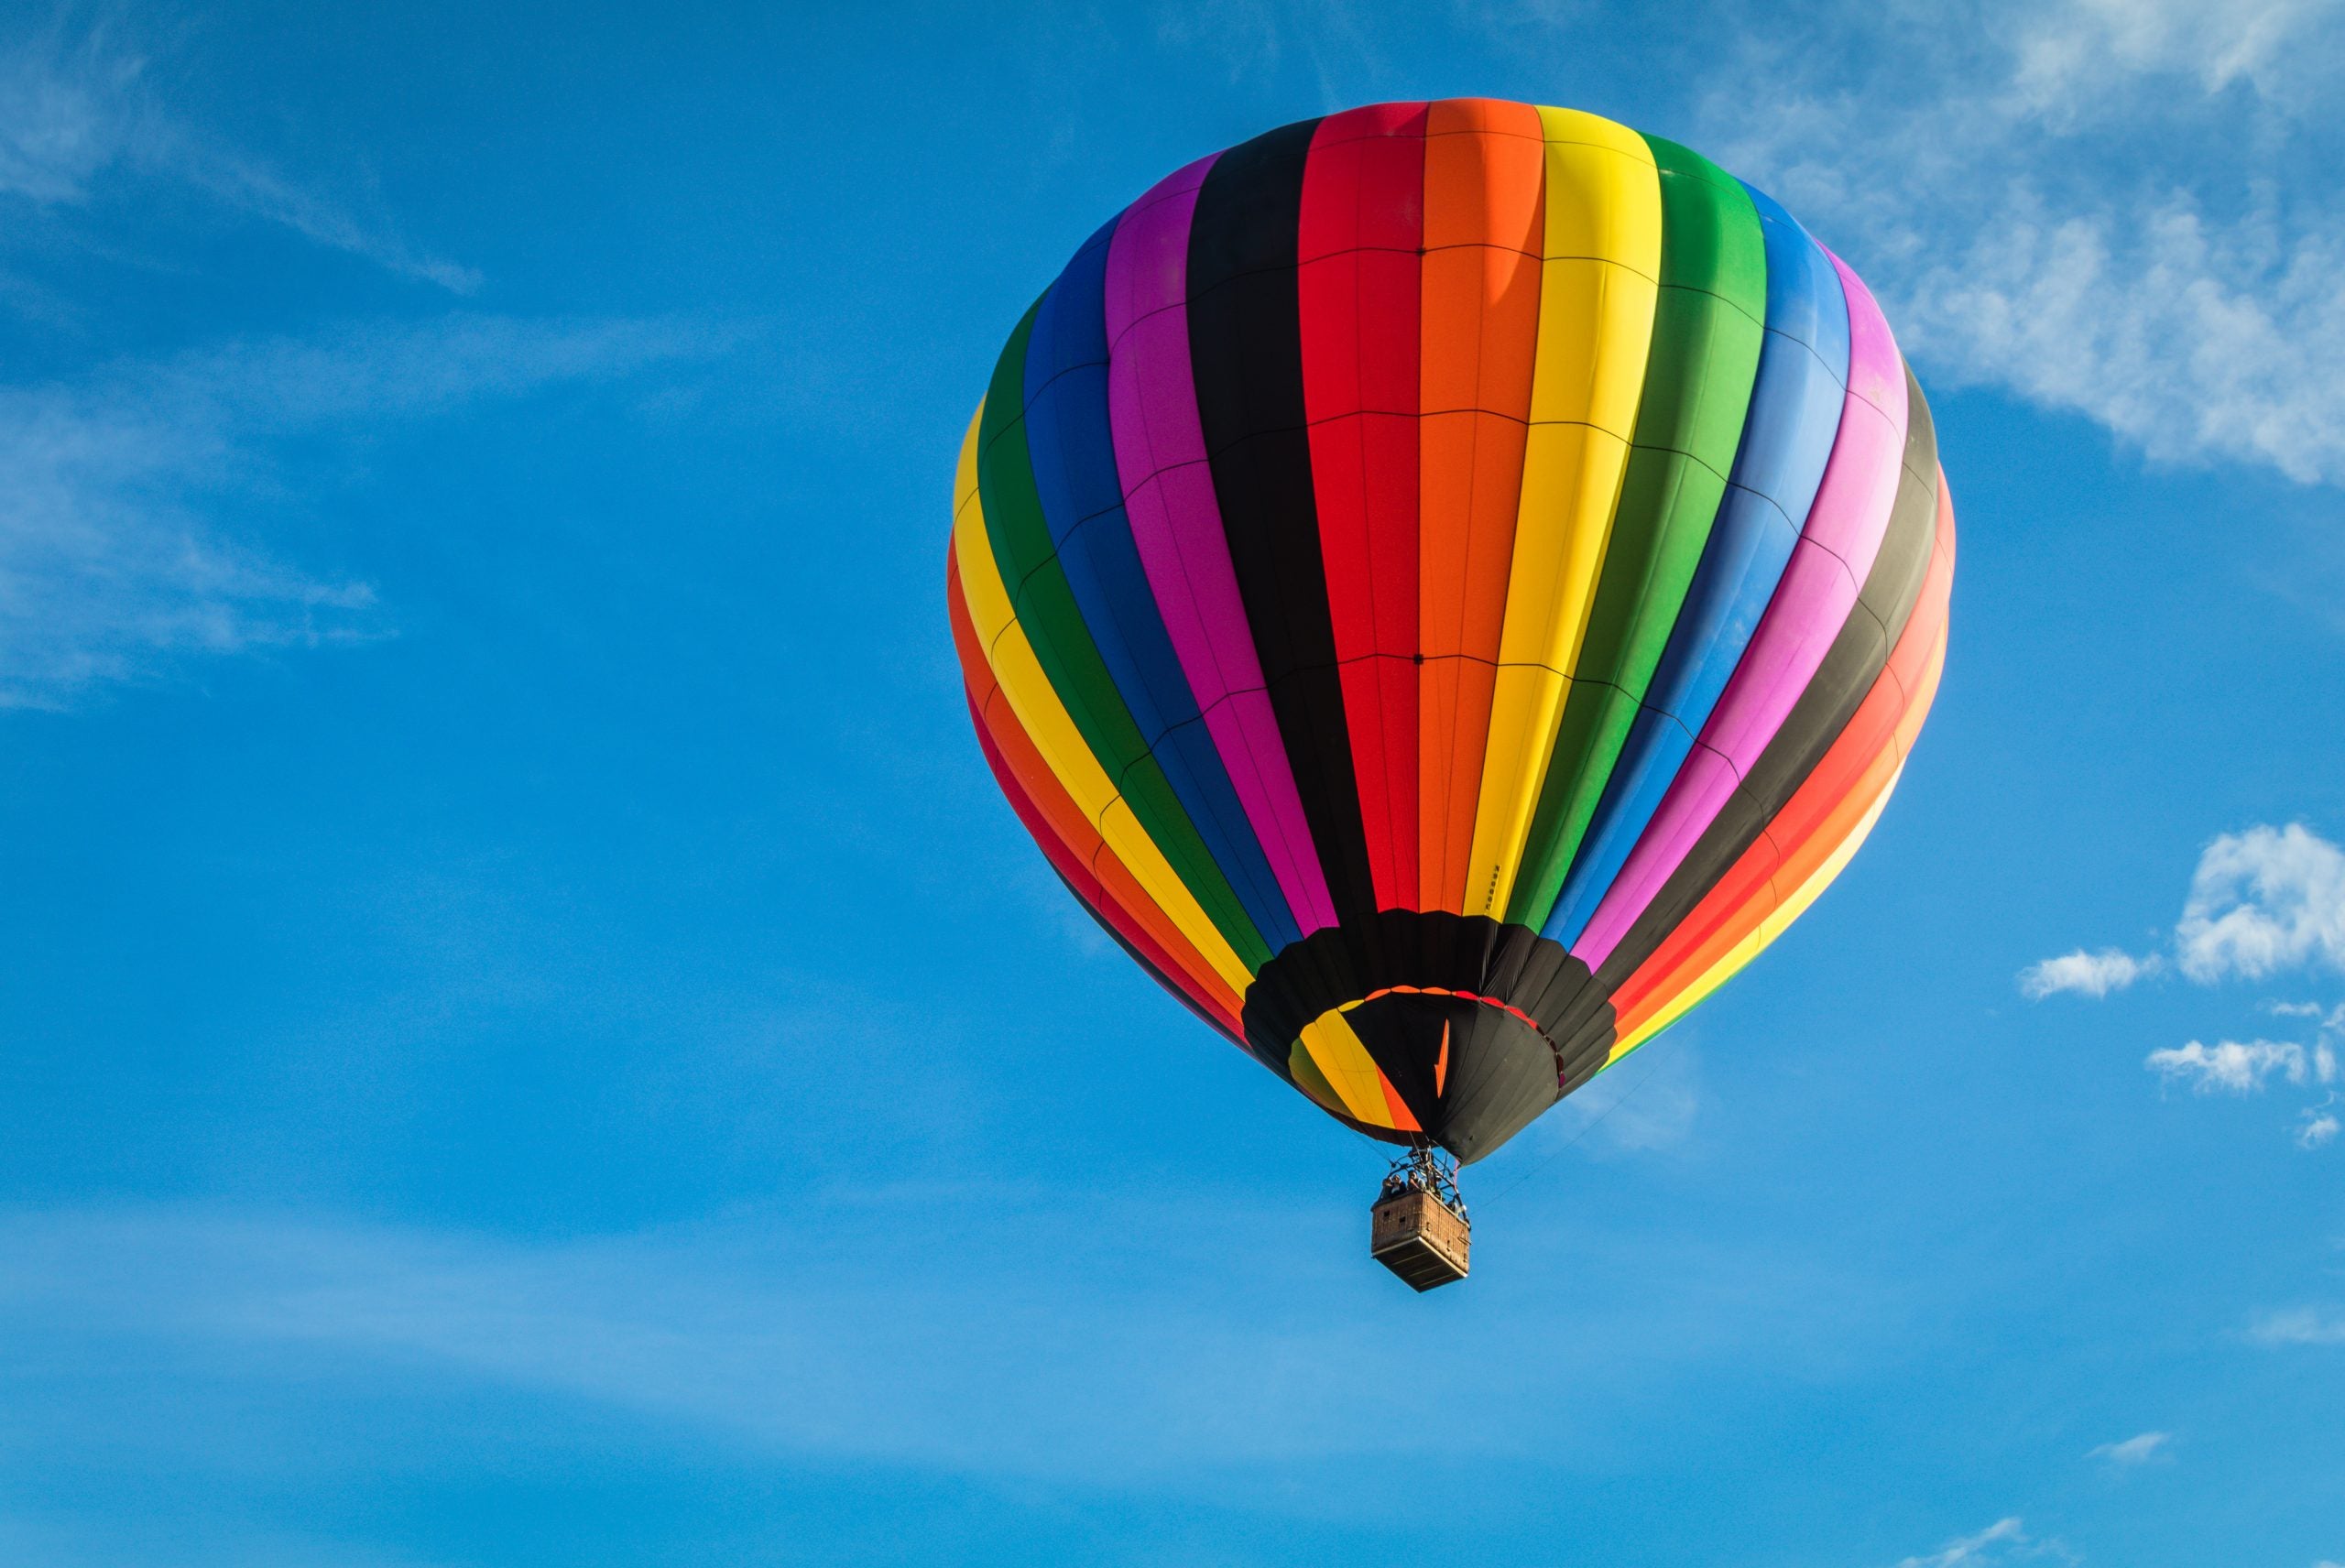 NTSB Welcomes New FAA Medical Rule for Hot Air Balloon Pilots